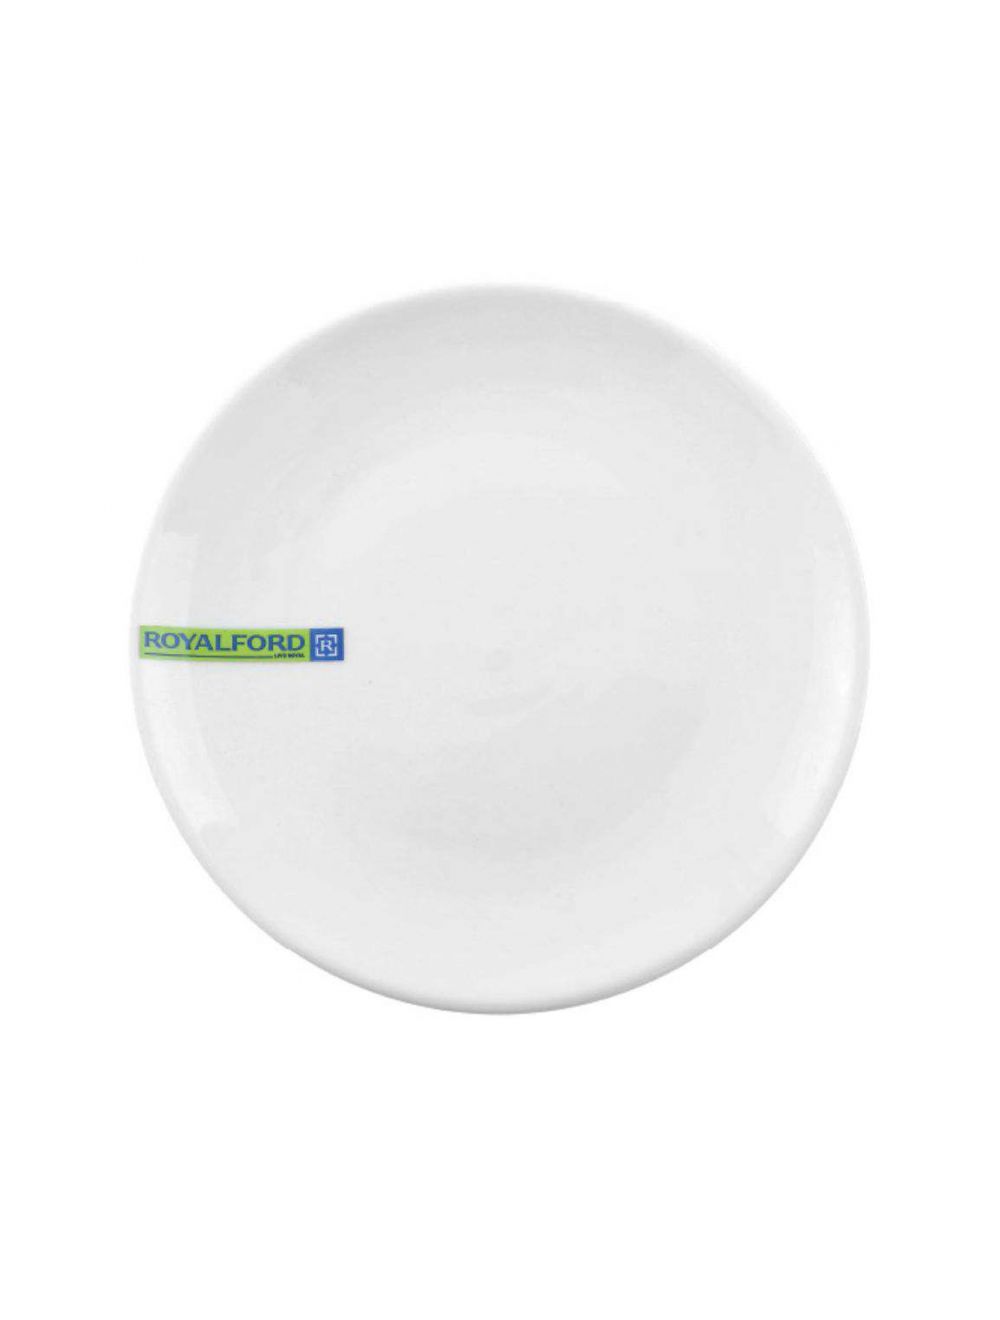 Royalford RF7999 Porcelain Magnesia Flat Plate, 10.5 Inch